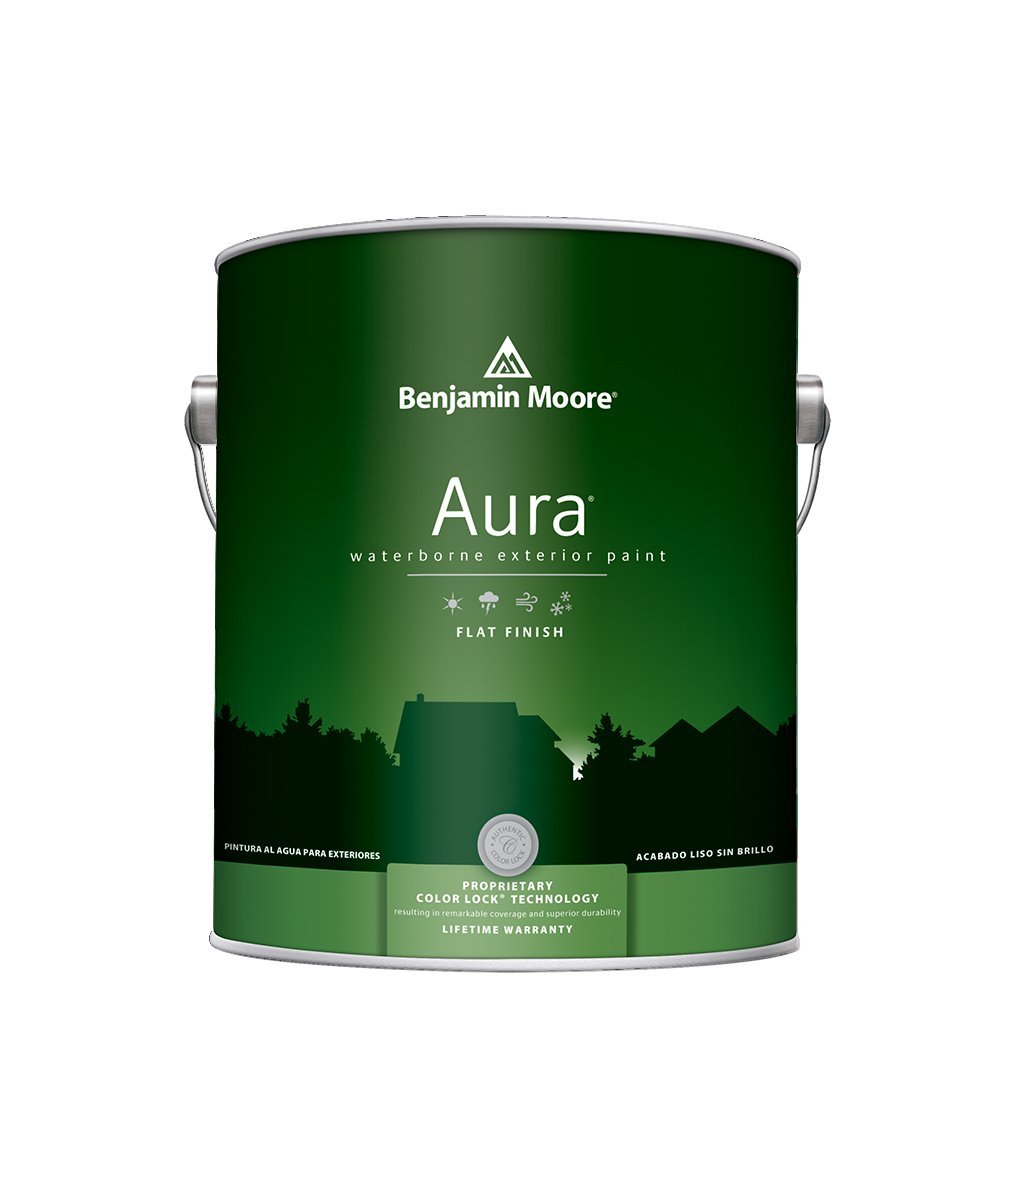 Benjamin Moore Aura Exterior Flat Paint available at Mallory Paint Stores.